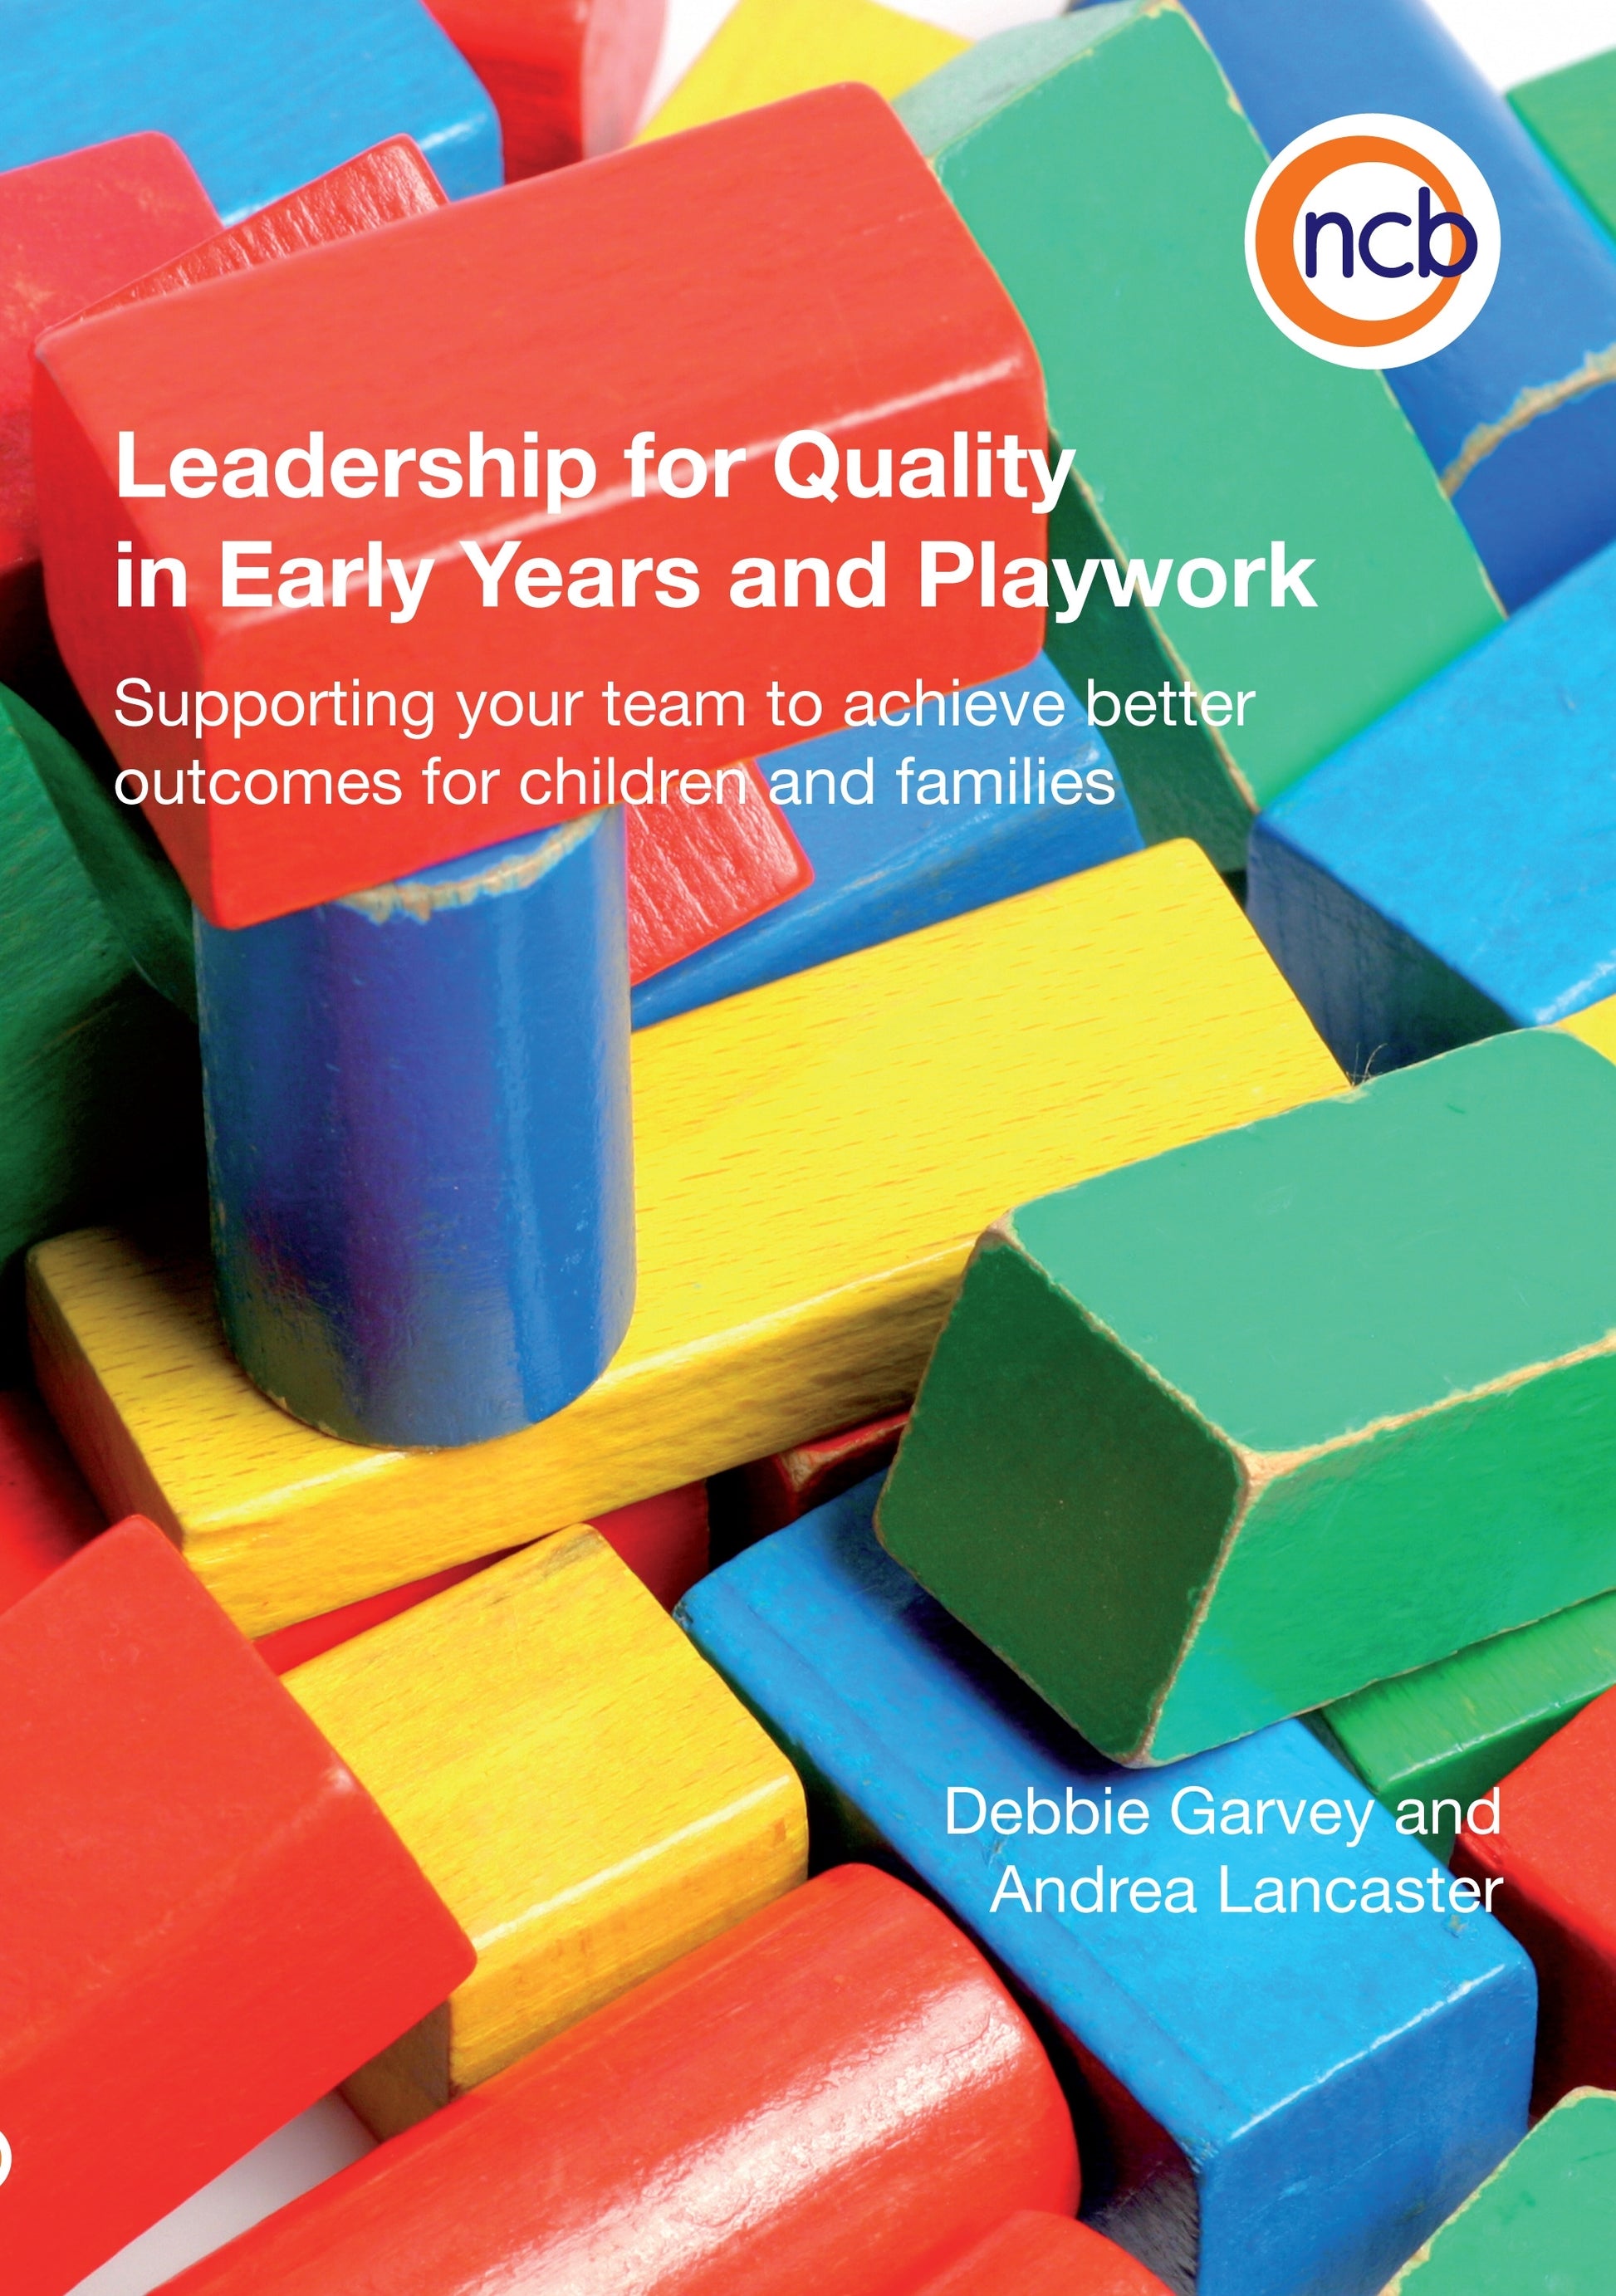 Leadership for Quality in Early Years and Playwork by Andrea Lancaster, Debbie Garvey